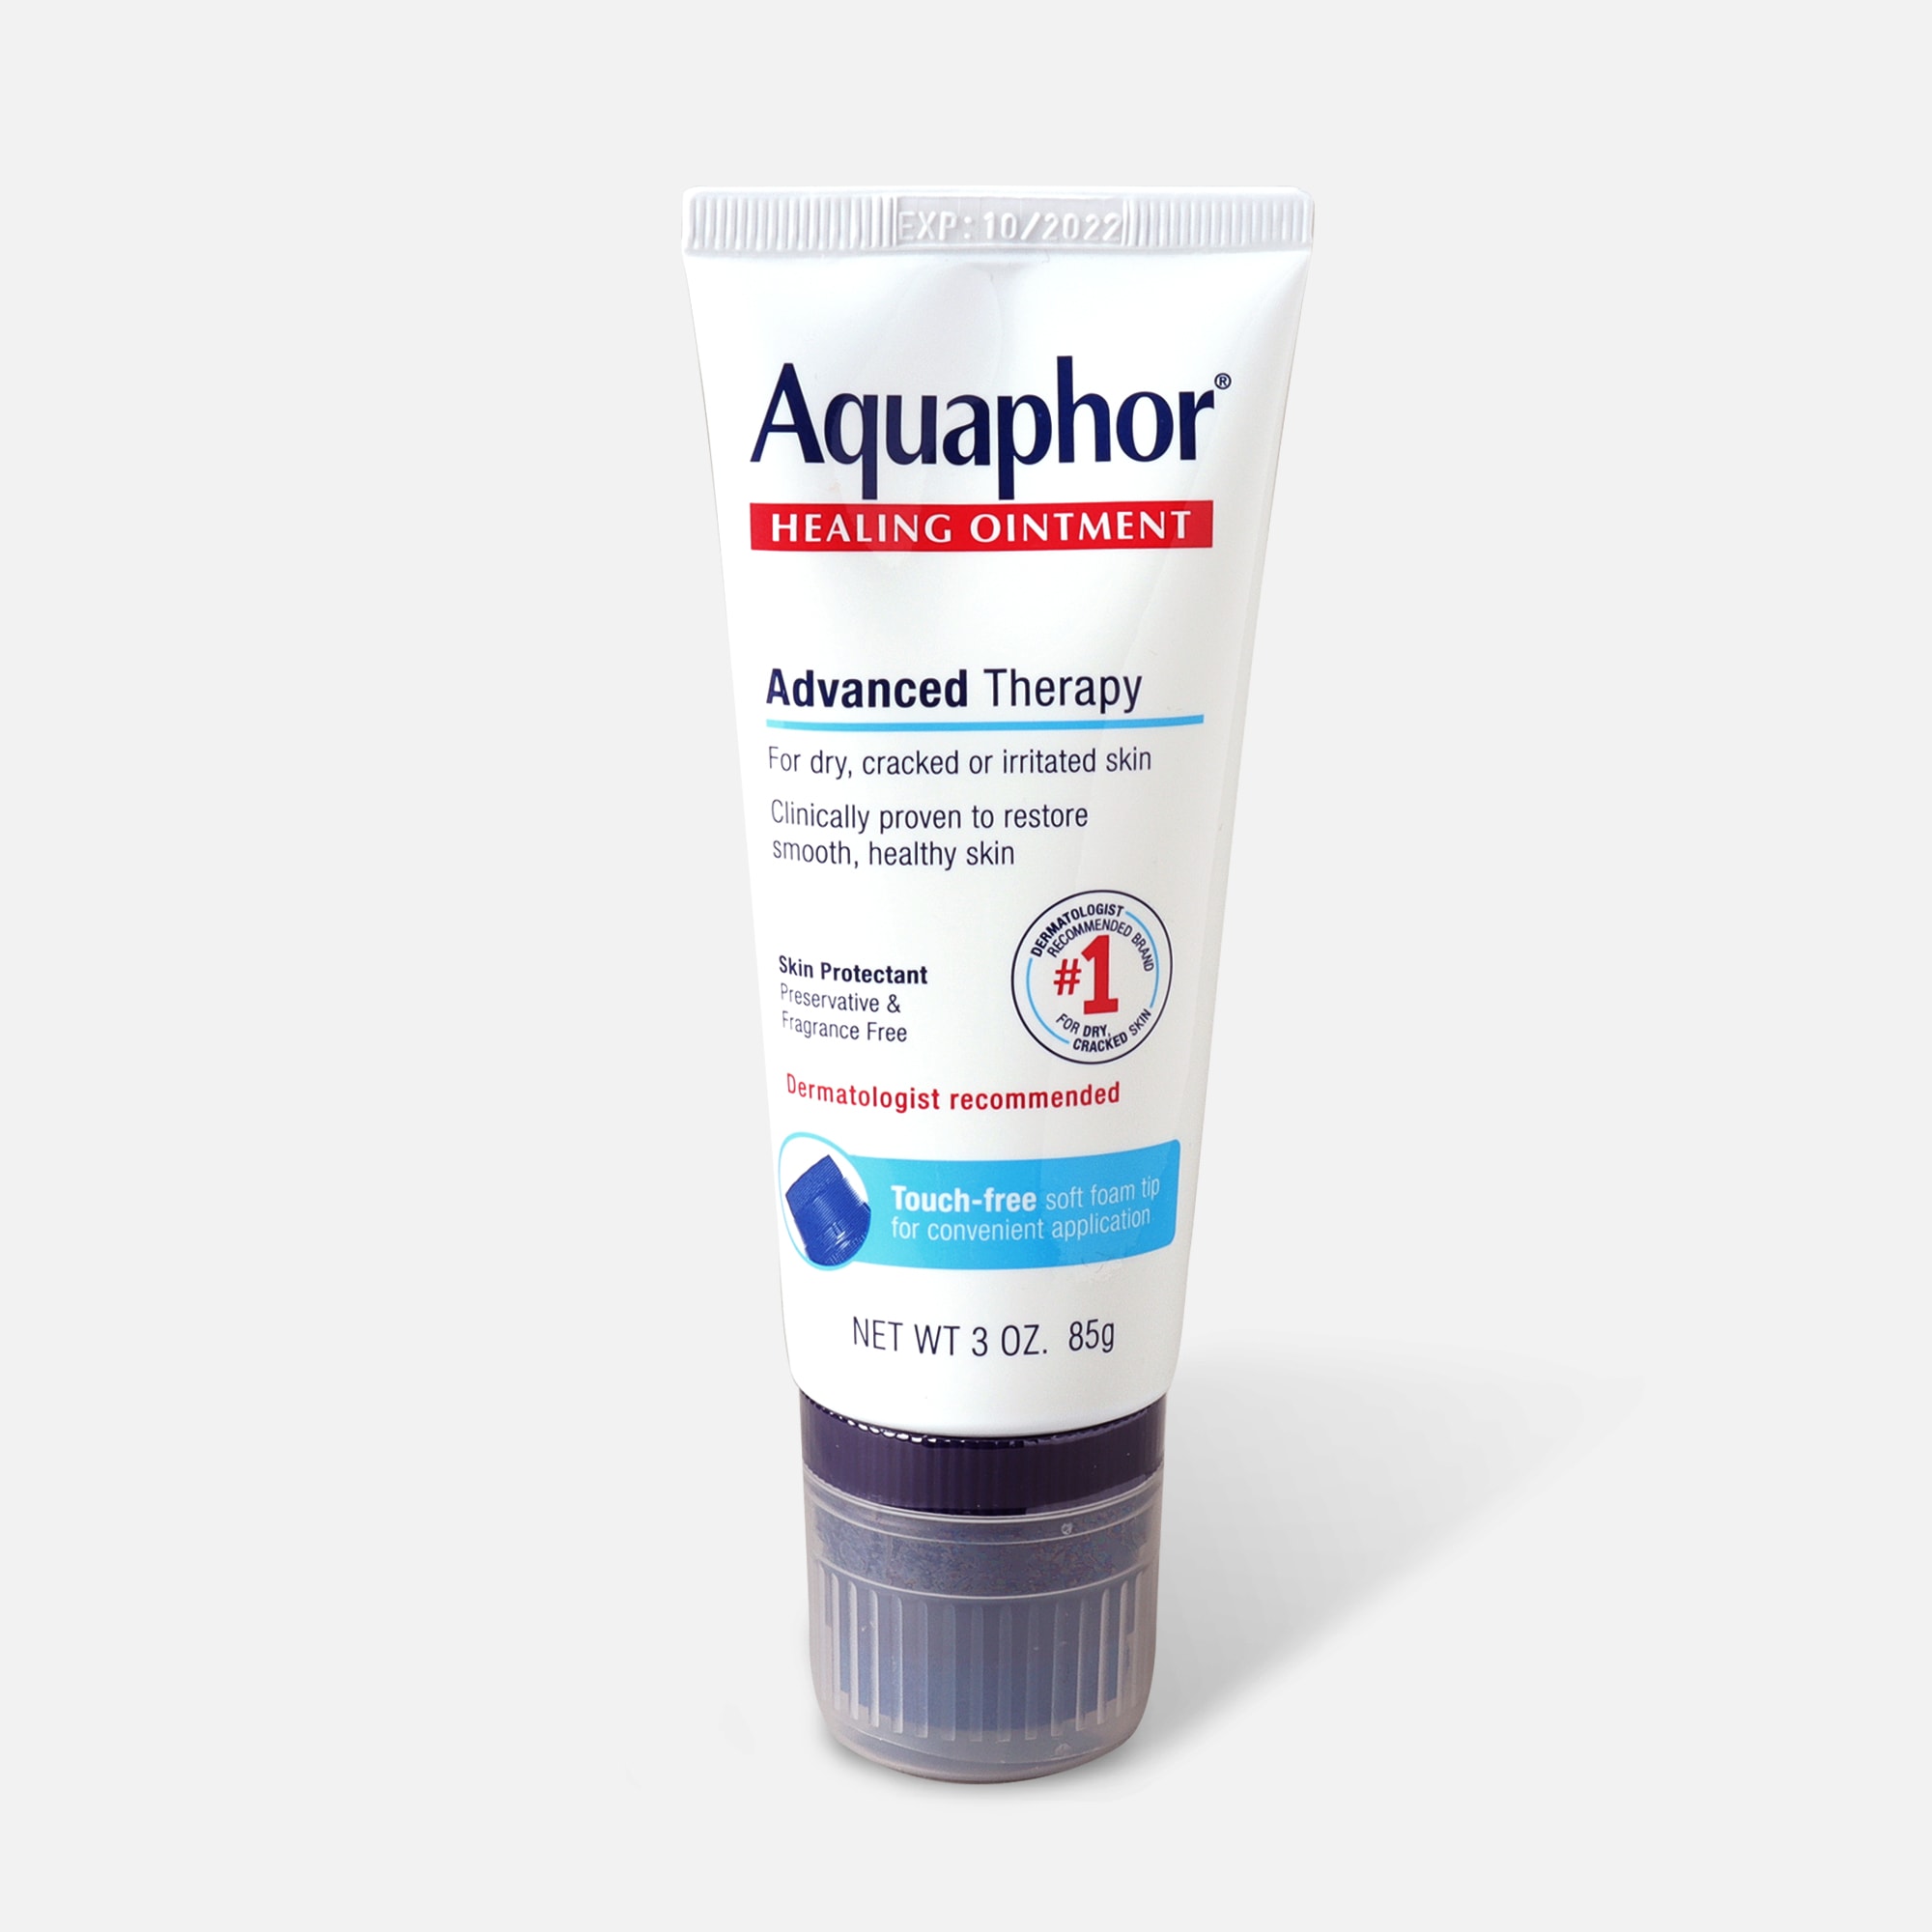 Aquaphor Healing Ointment with Touch-Free Applicator, 3 oz.